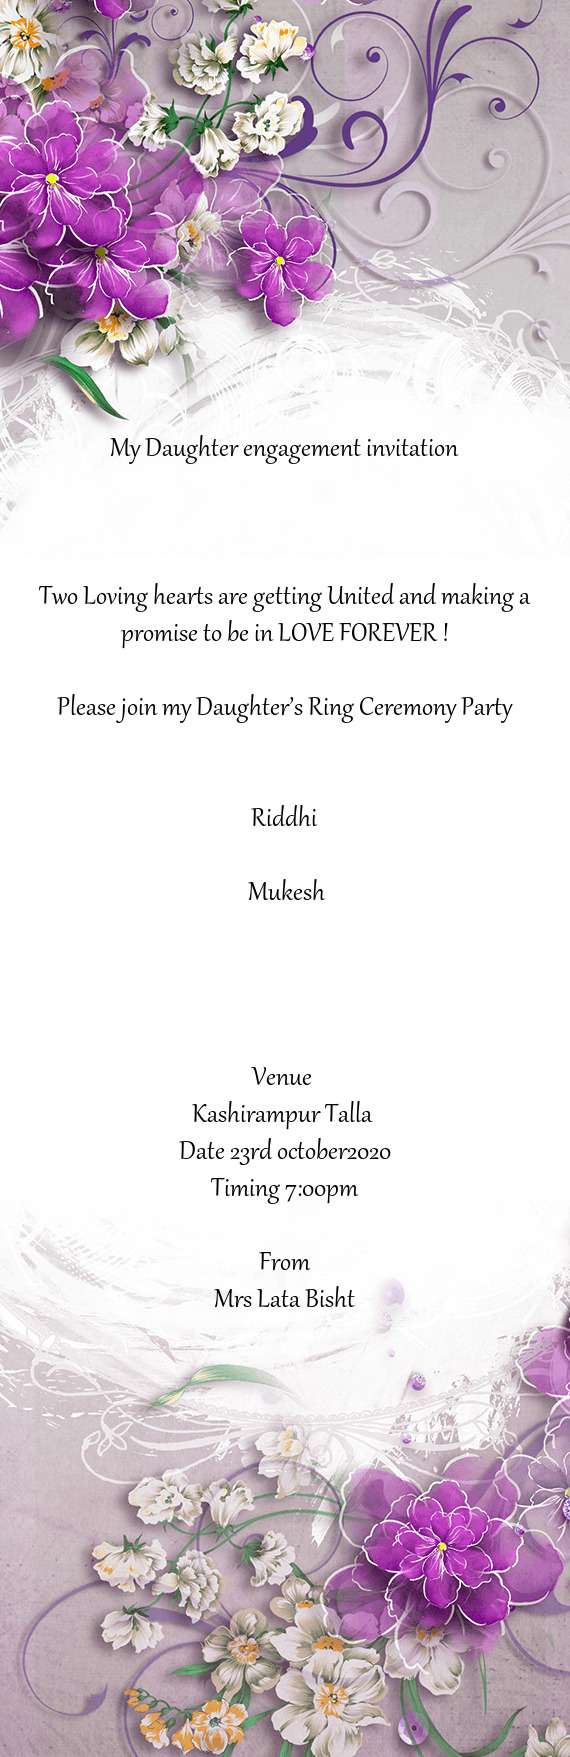 To be in LOVE FOREVER !
 
 Please join my Daughter’s Ring Ceremony Party
 
 
 Riddhi
 ❤❤
 Muk